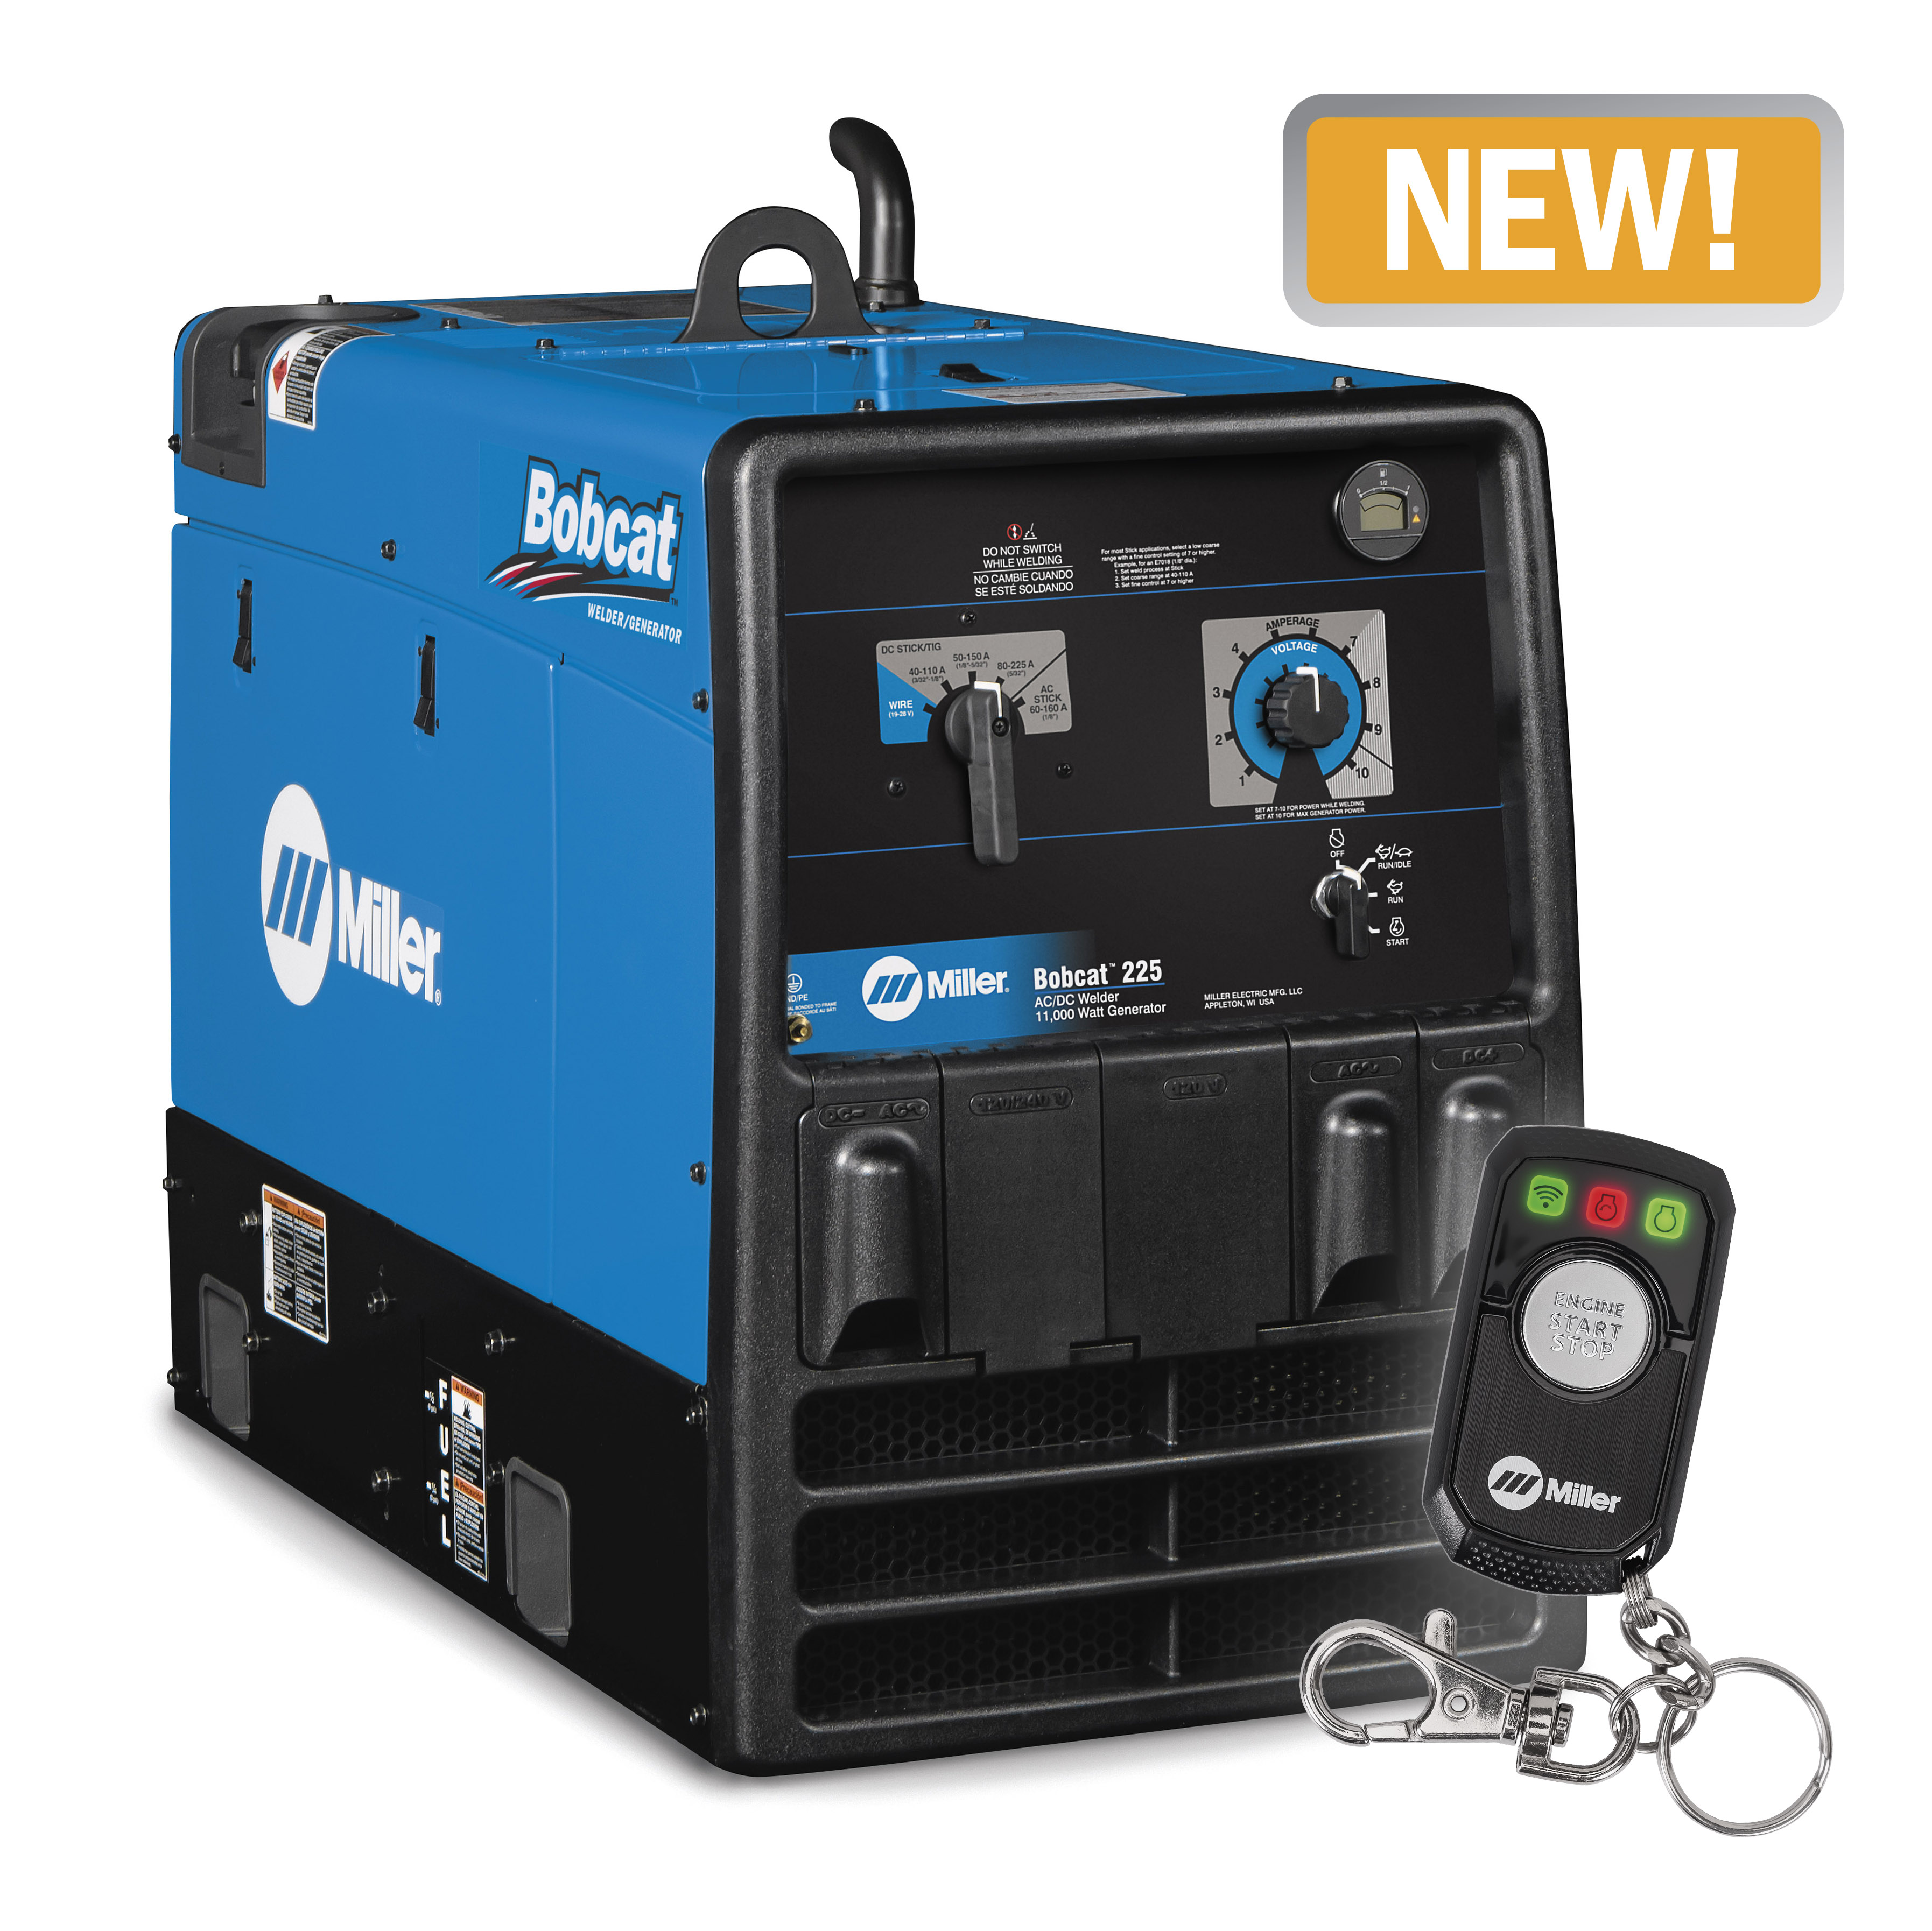 Bobcat™ 225 with Remote Start/Stop, GFCI